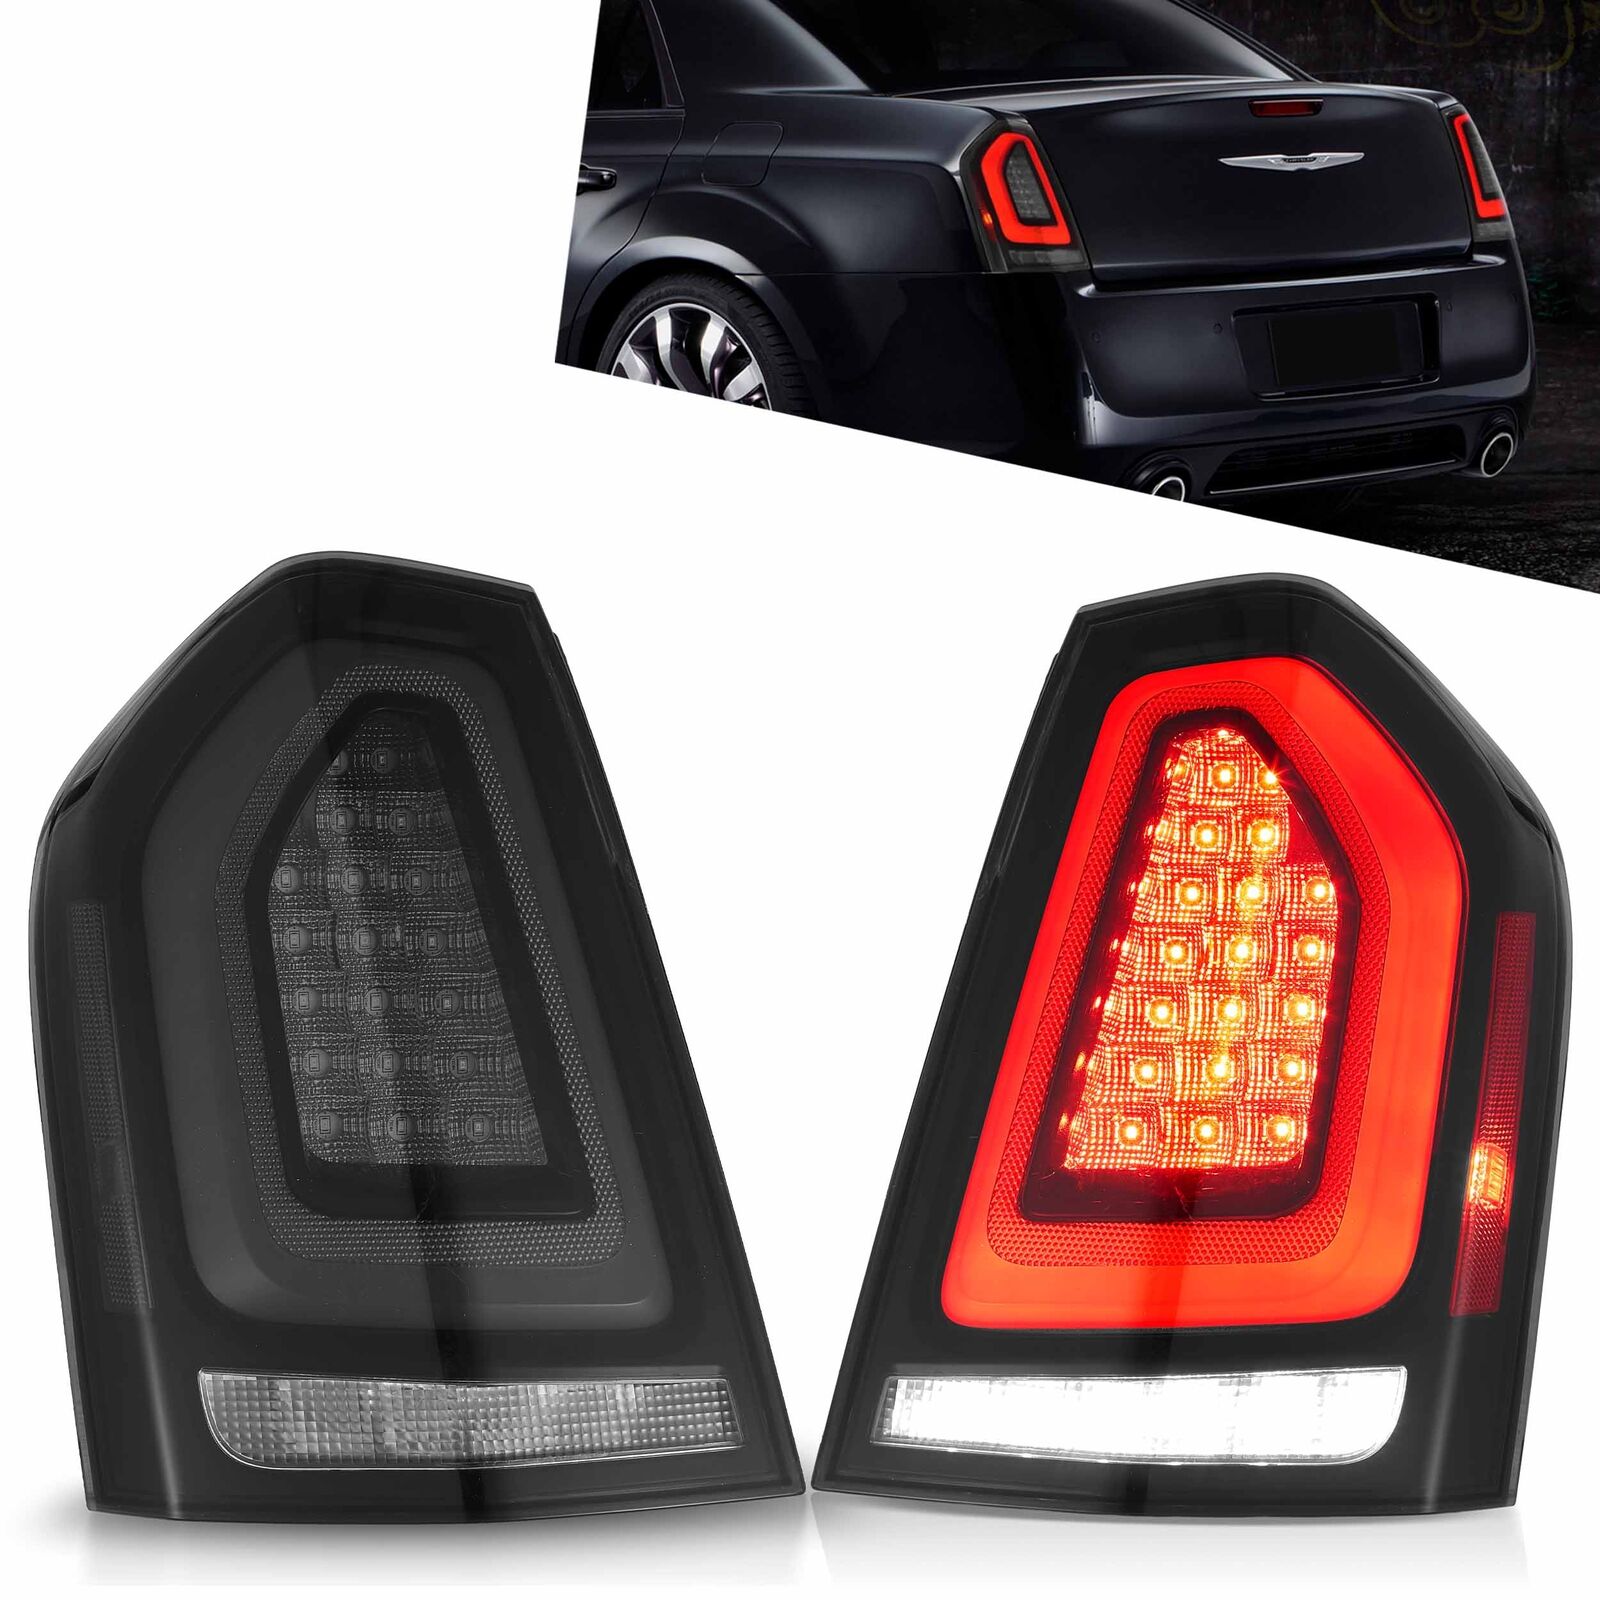 VLAND Tail Lights SMOKED LED For 2011-2014 Chrysler 300 W/Startup Animation L+R